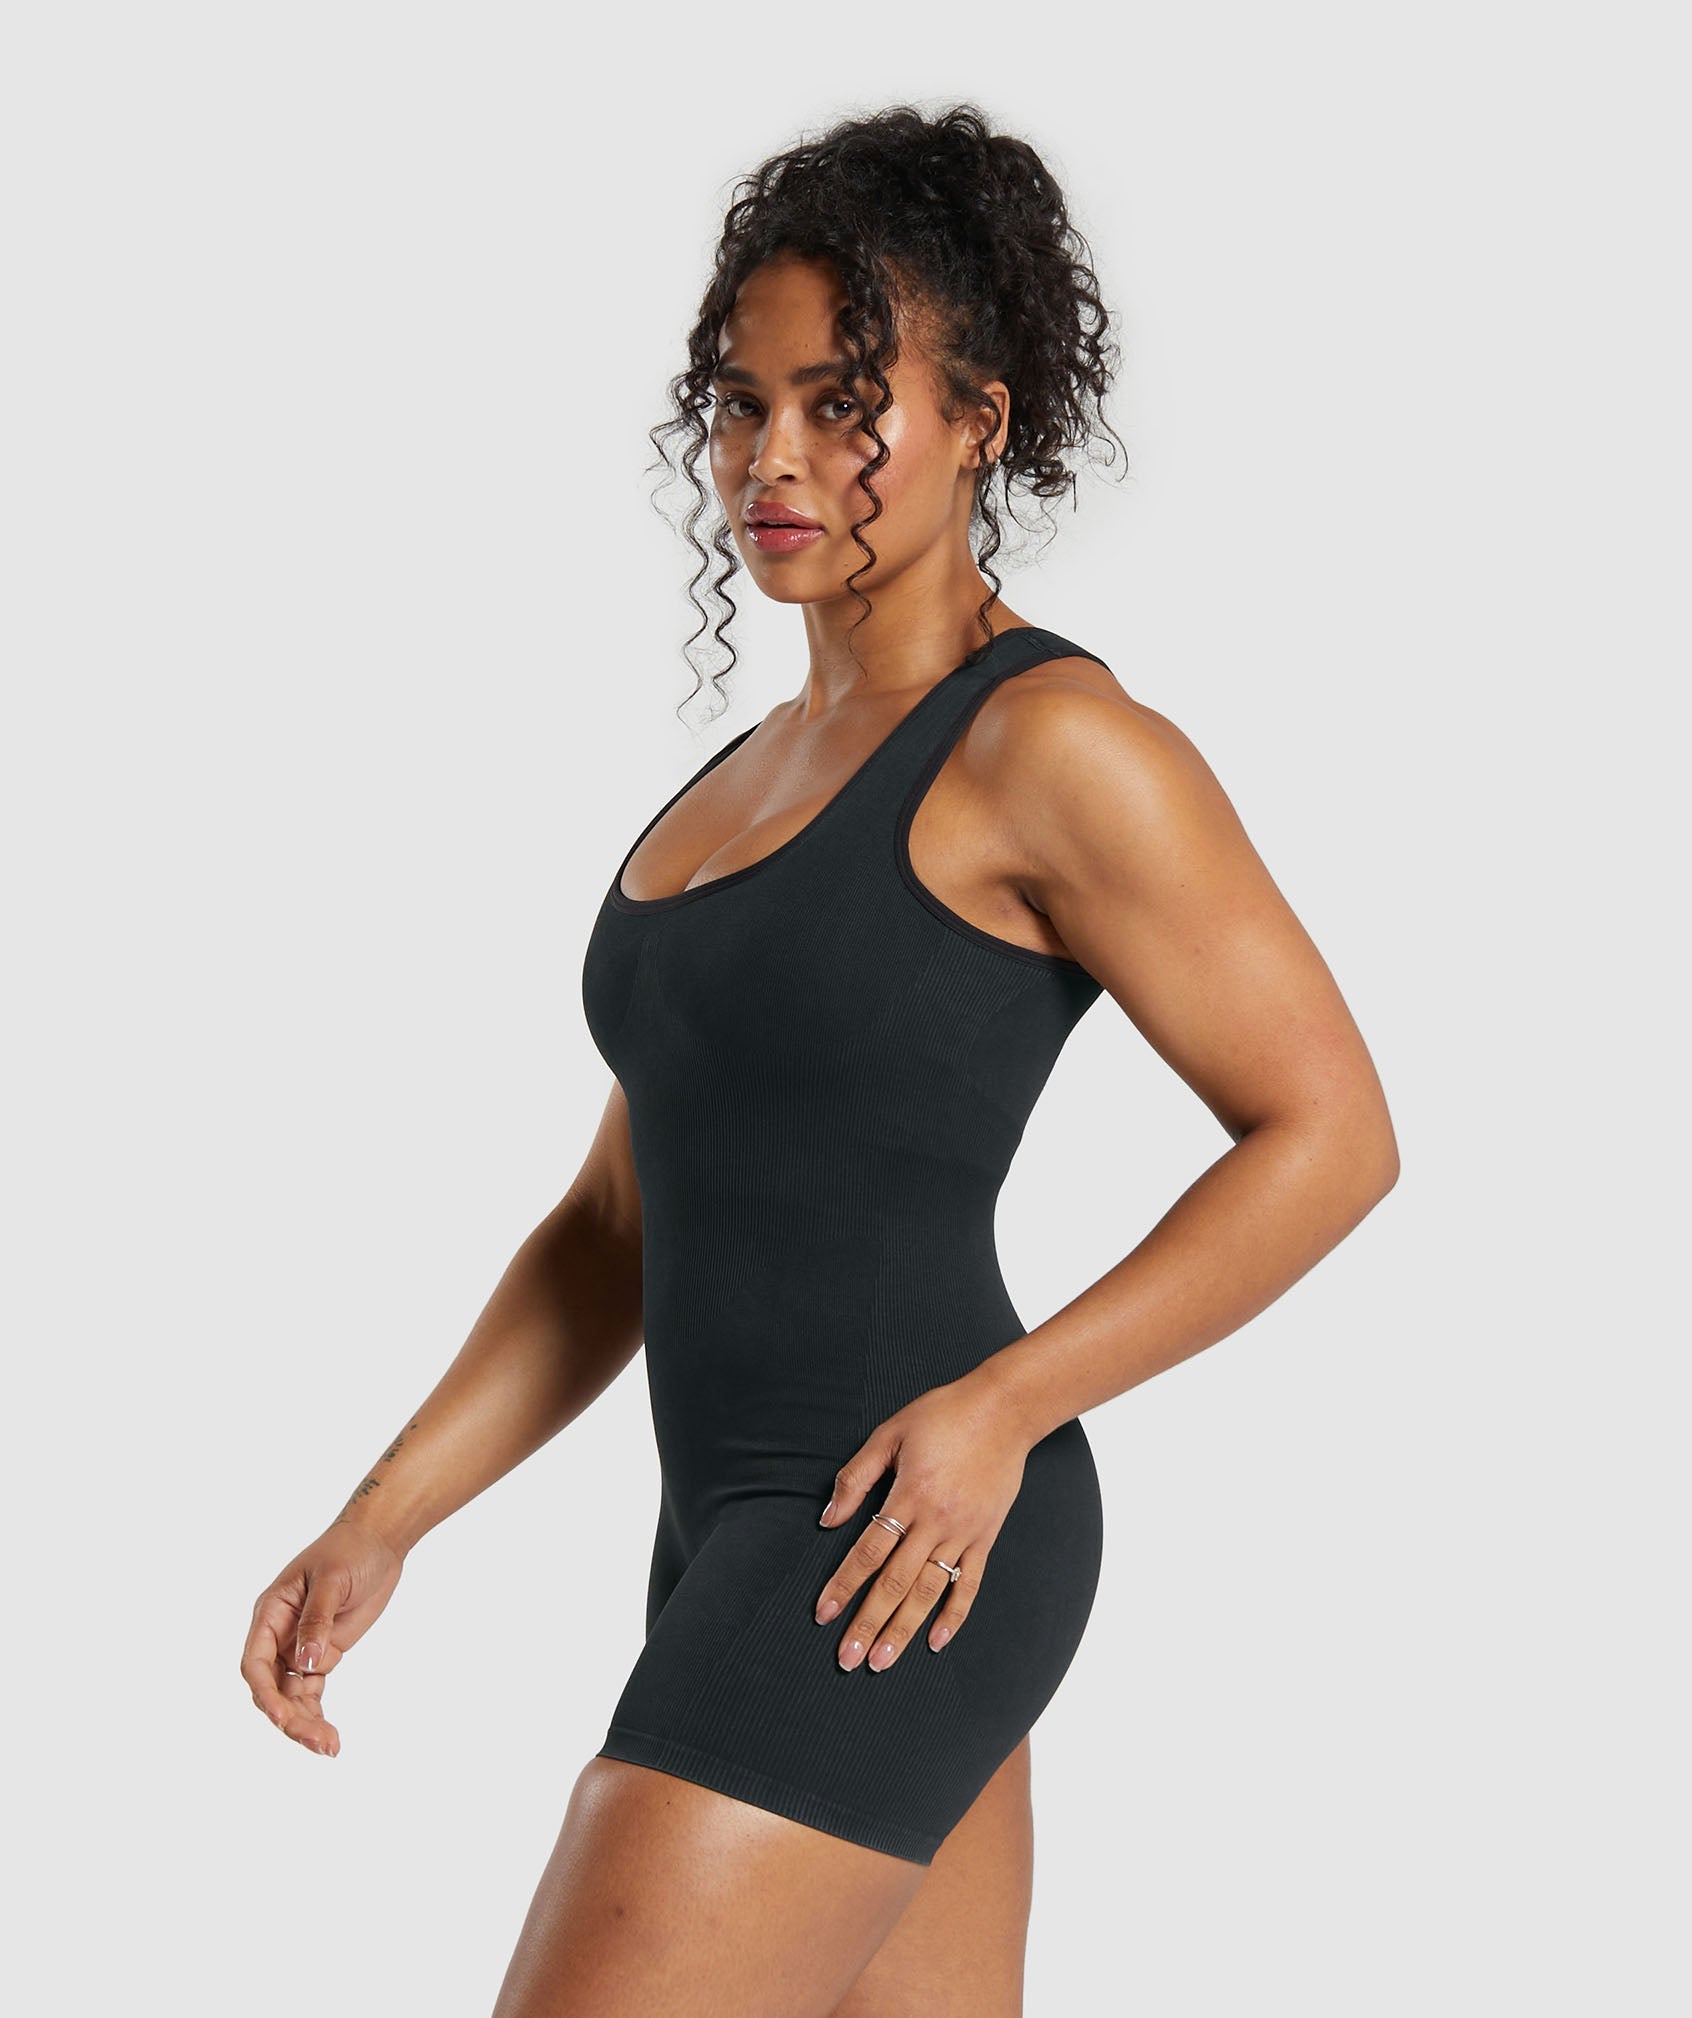 Gains Seamless All-In-One in Black - view 3